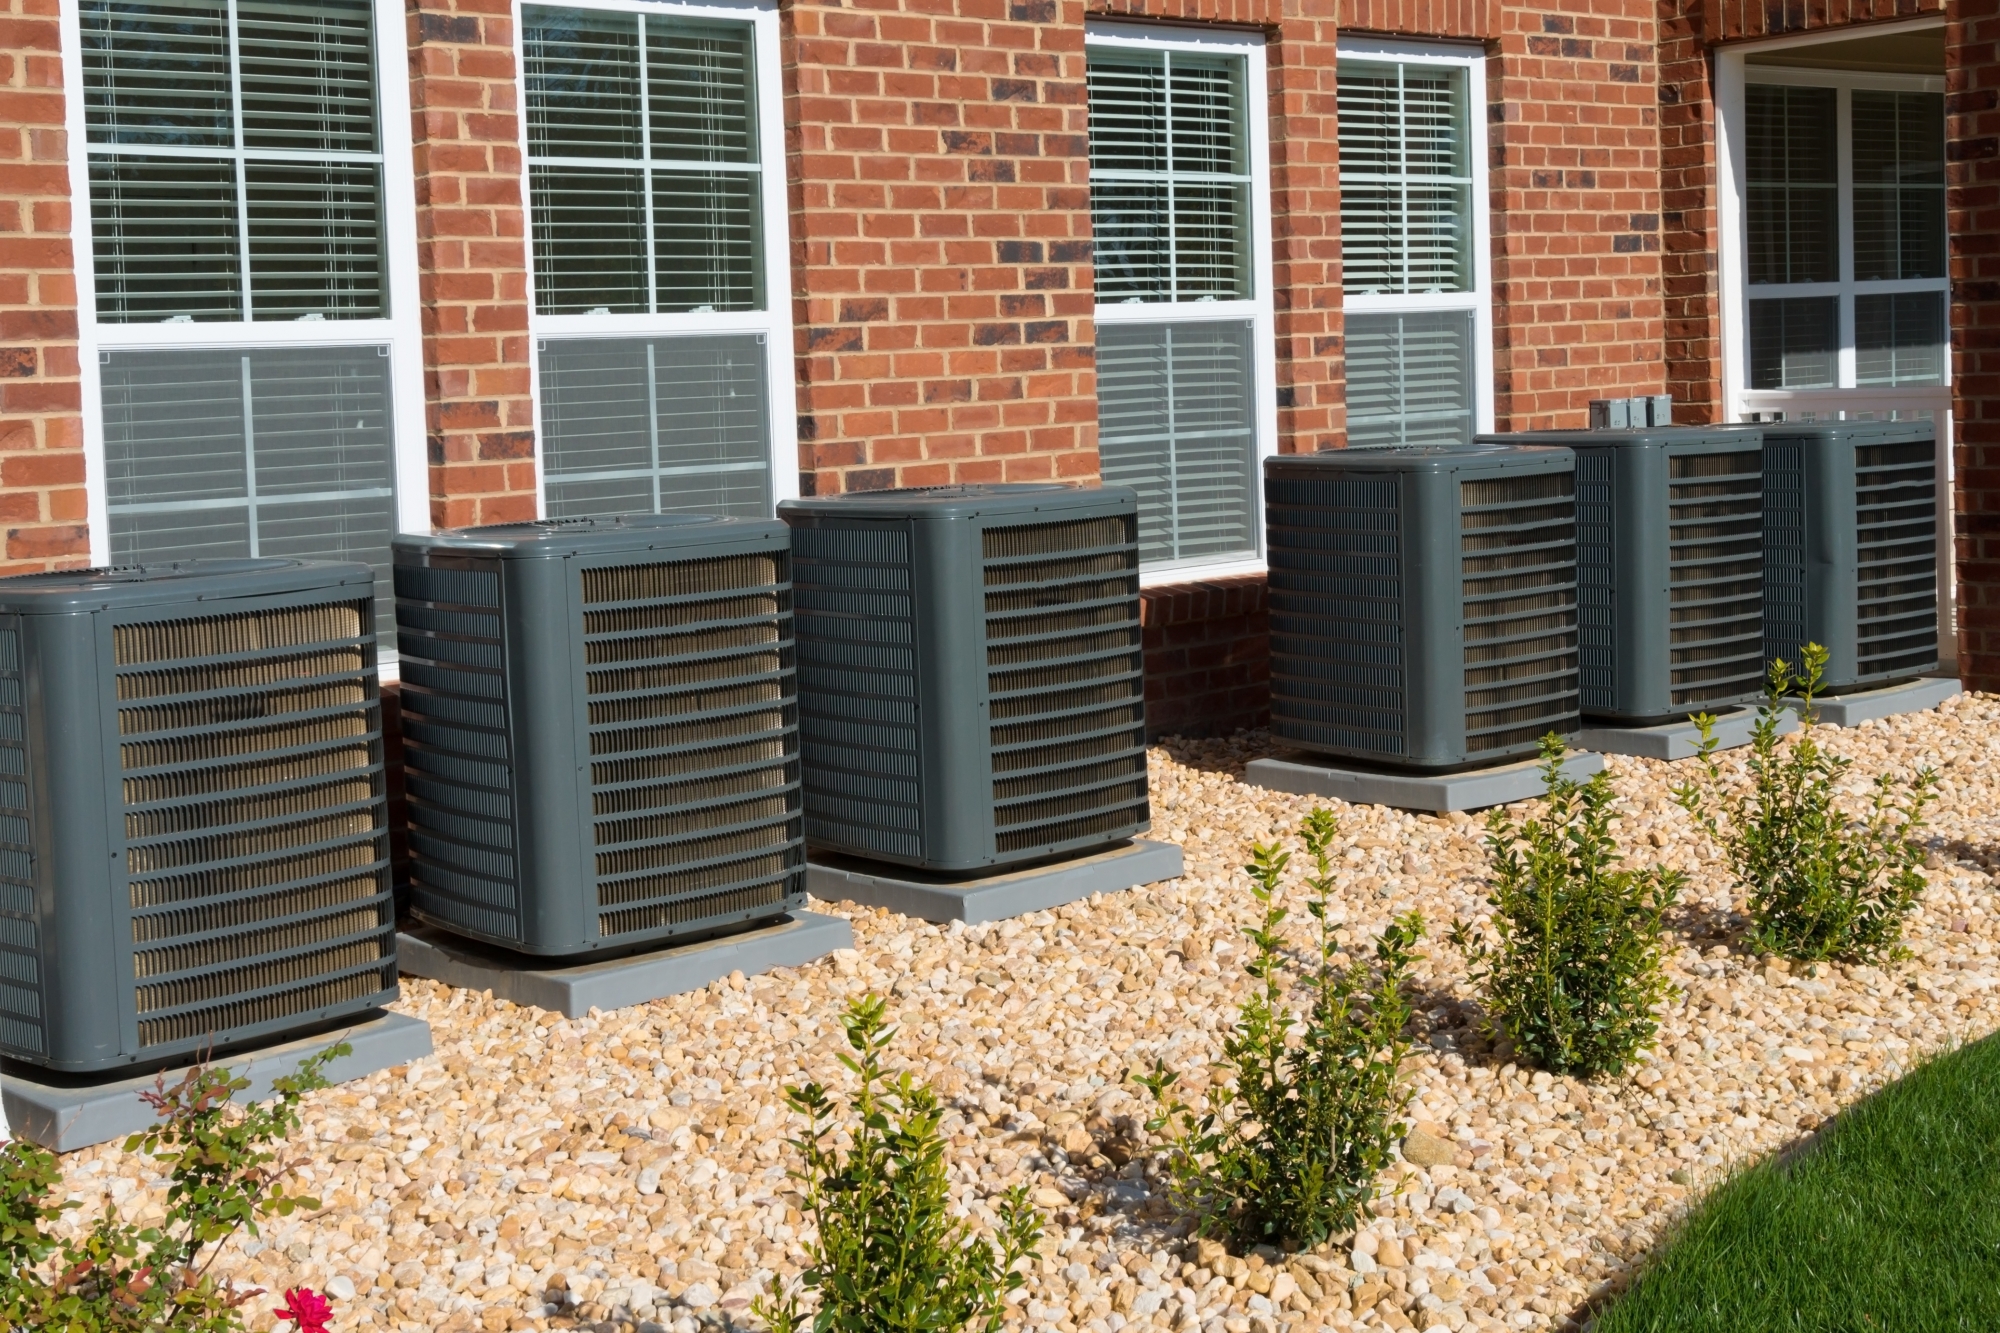 Line up of air conditioning units outside of office building